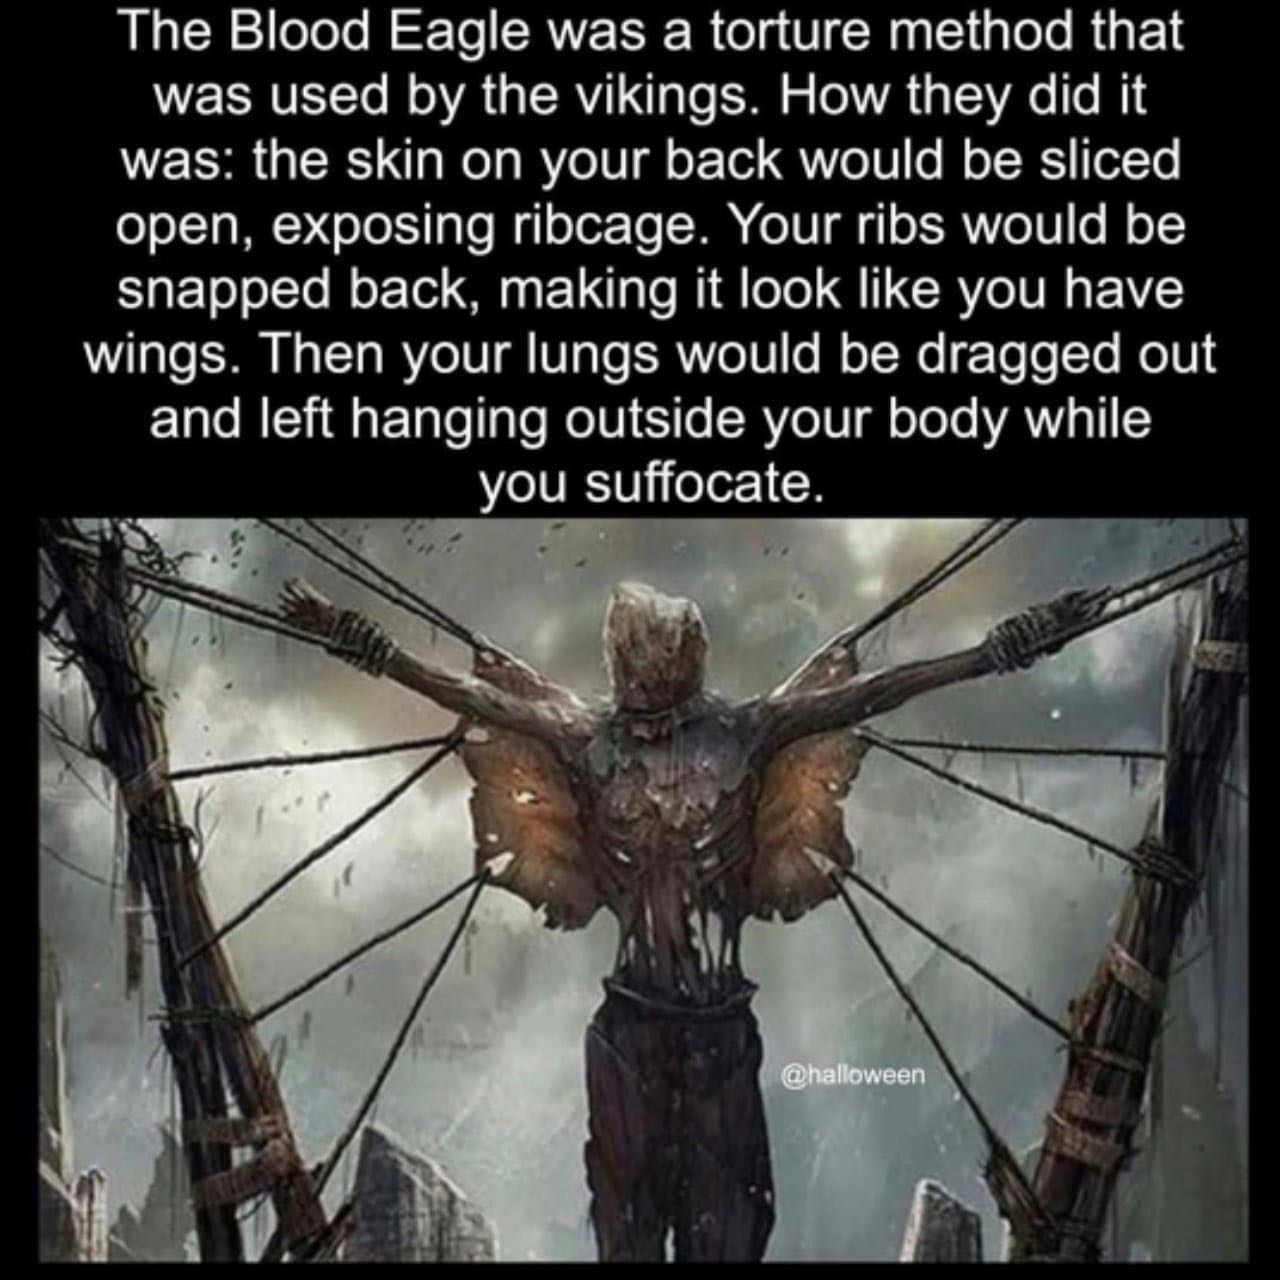 blood eagle - The Blood Eagle was a torture method that was used by the vikings. How they did it was the skin on your back would be sliced open, exposing ribcage. Your ribs would be snapped back, making it look you have wings. Then your lungs would be dra